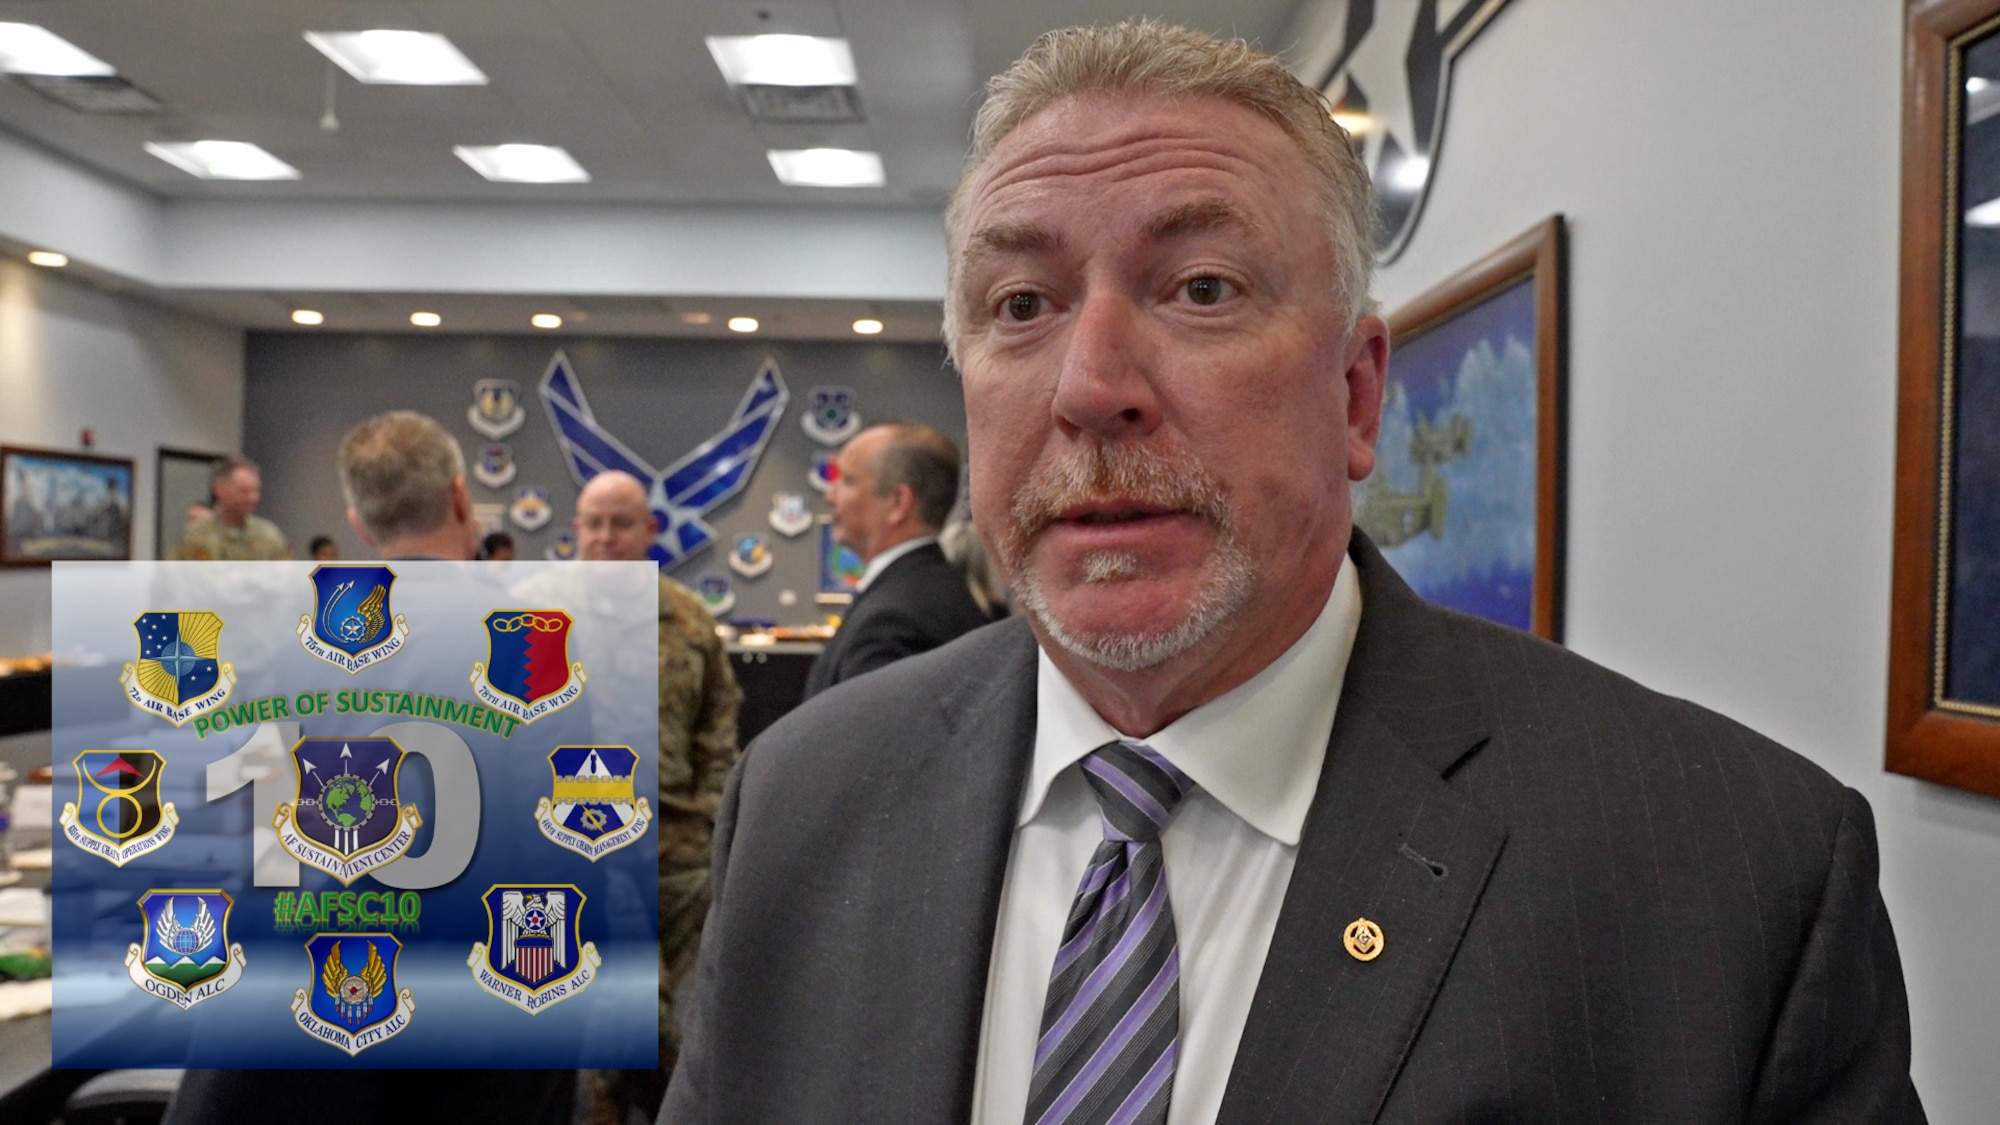 During the AFSC Commander's Summit, April 12 and 13, 2022 at Tinker Air Force Base, leaders like Ronald Blackmore, director, Information Protection, gave their thoughts about the growth of the Sustainment Center throughout the last 10 years. Hear what Mr. Blackmore had to say in this video.